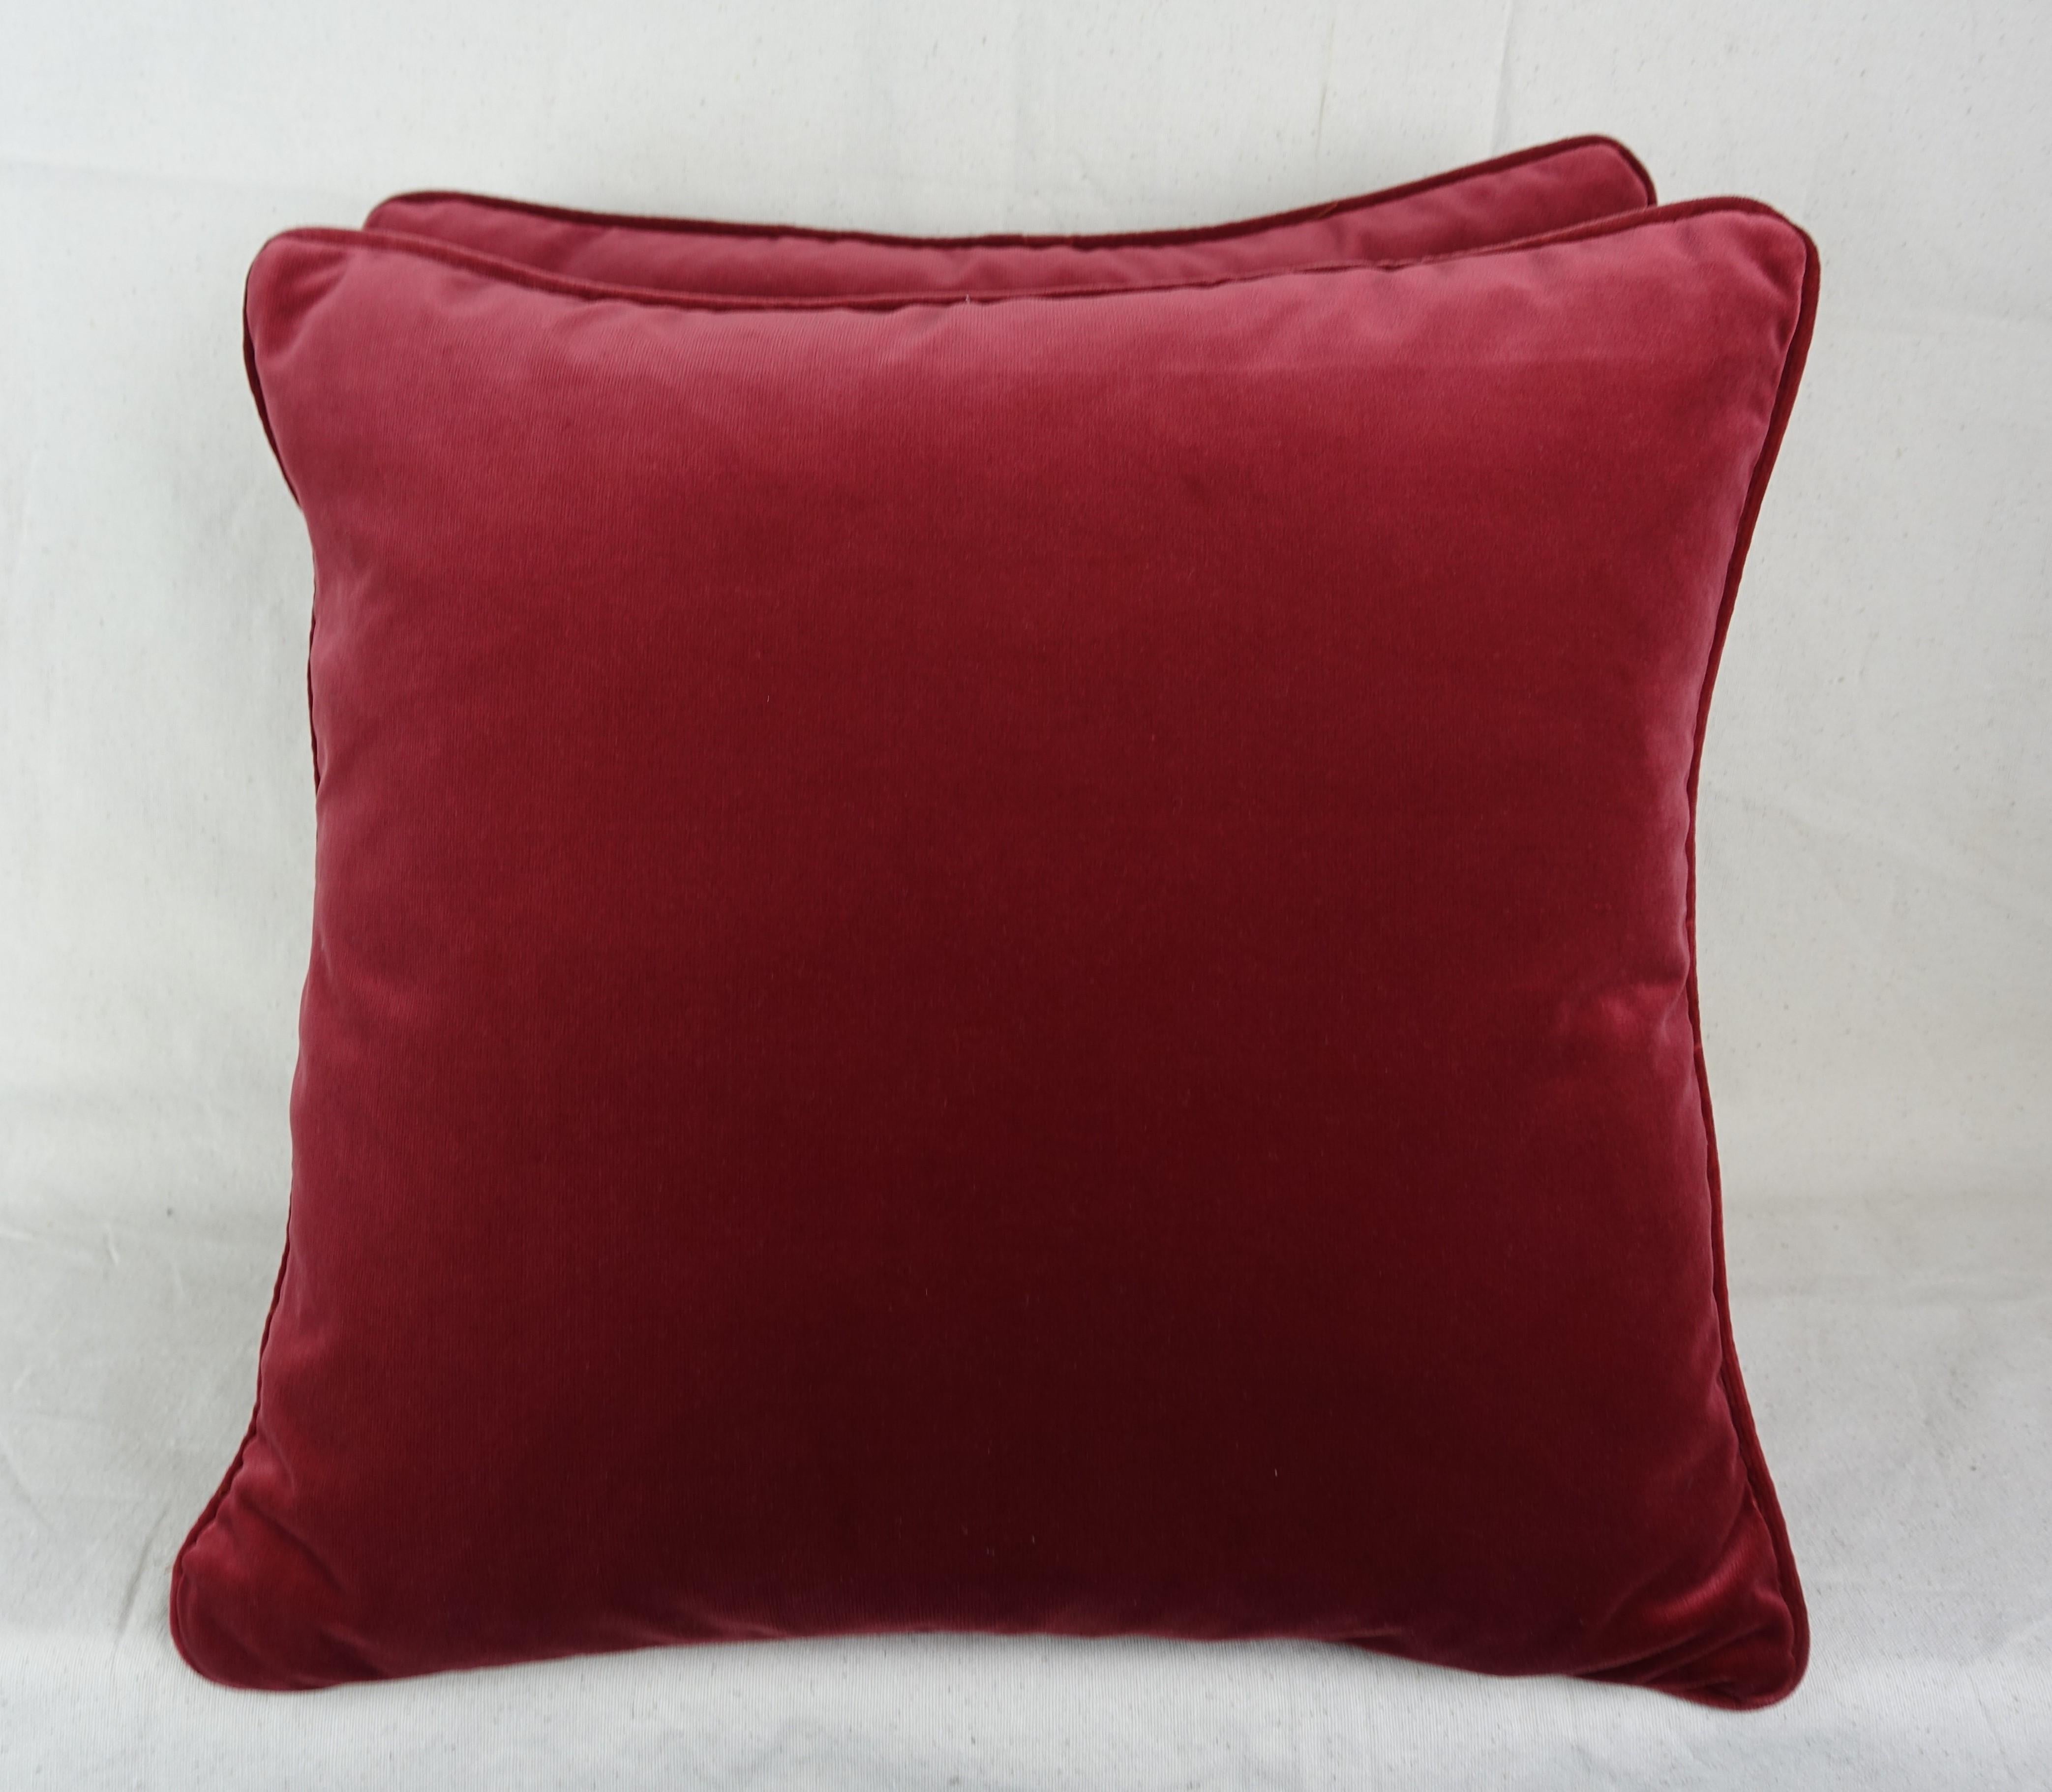 Italian Glicine Patterned Red and Gold Fortuny Pillows, a Pair